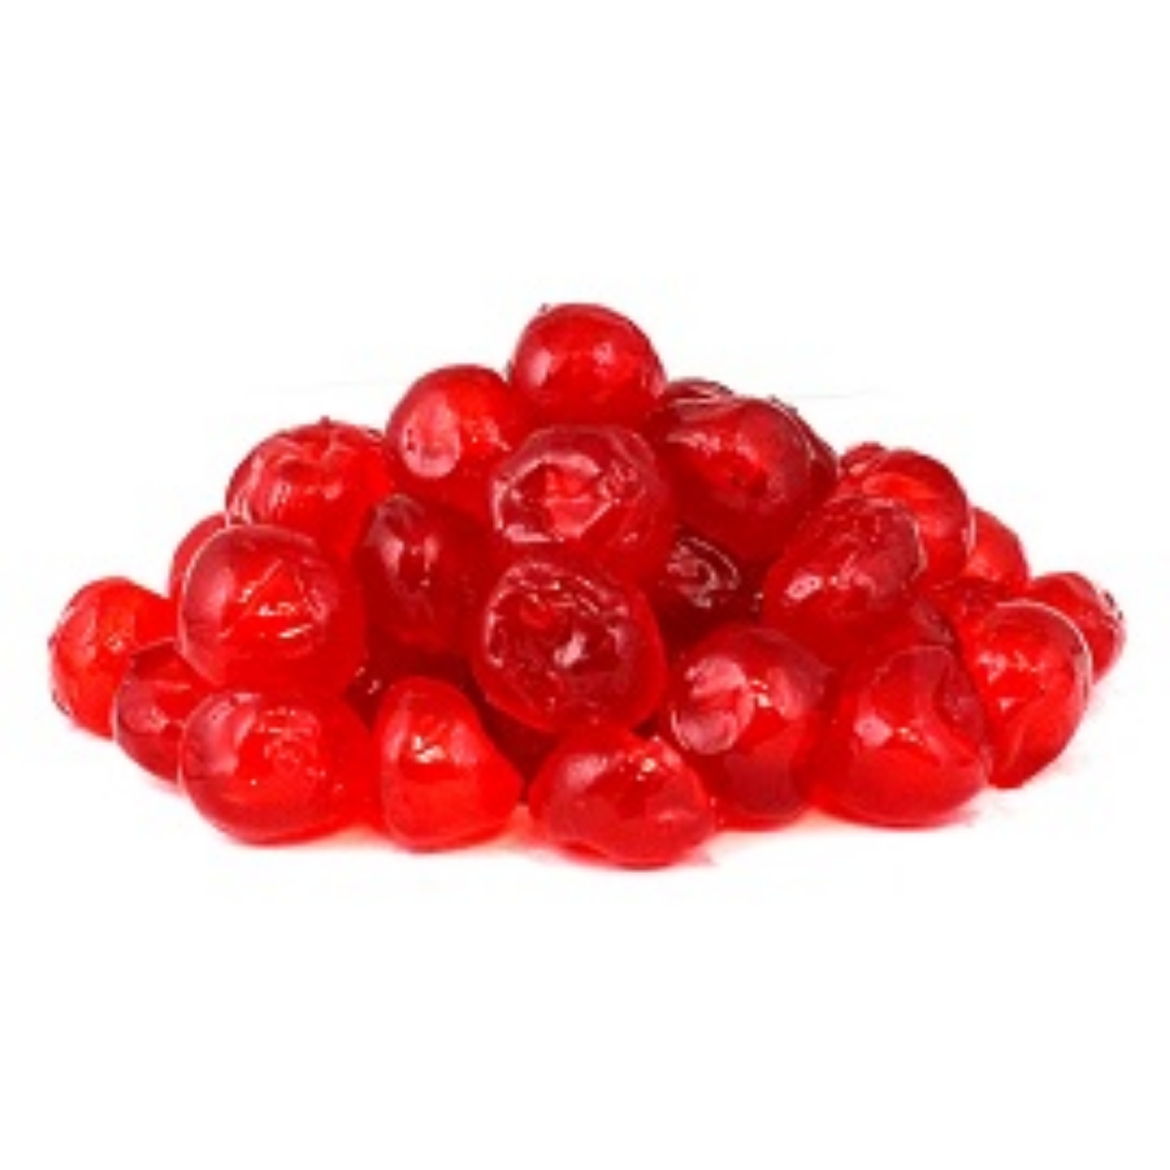 Picture of 5KG RED GLACE CHERRIES WHOLE